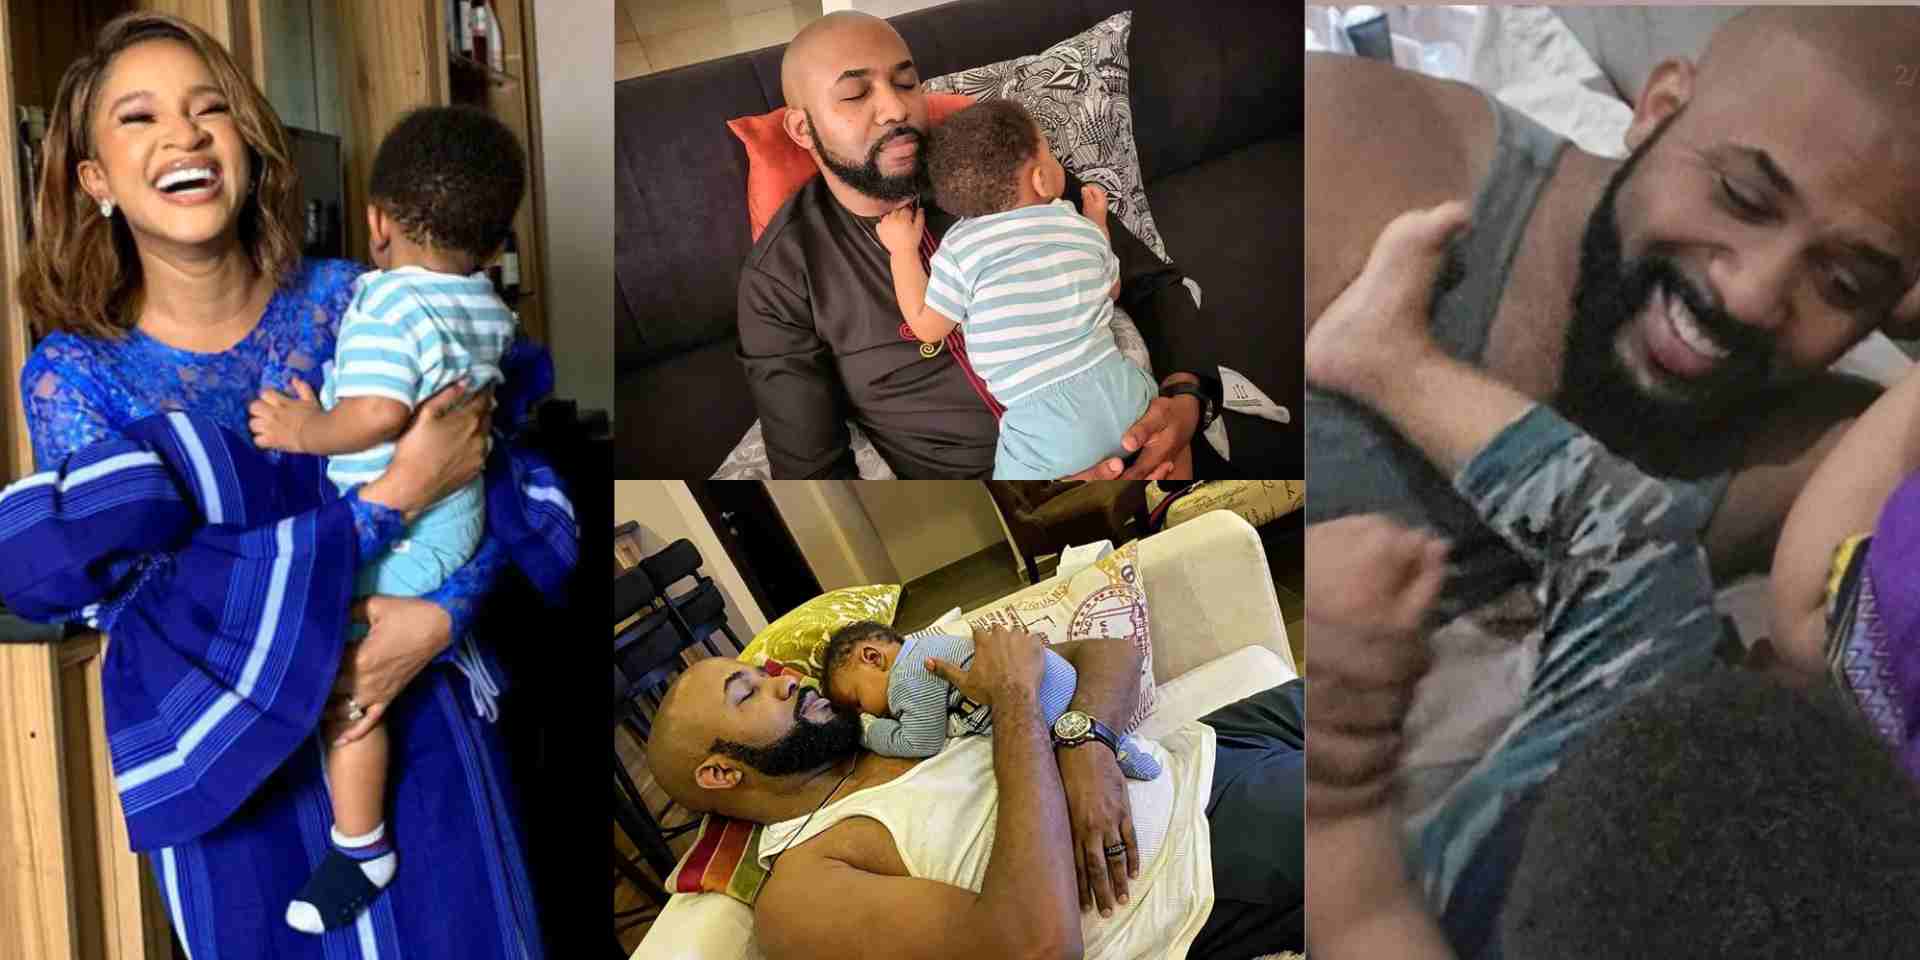 "The best person I could have been on this parental journey with" - Adesua Etomi pens sweet note for husband, Banky W on Father's Day